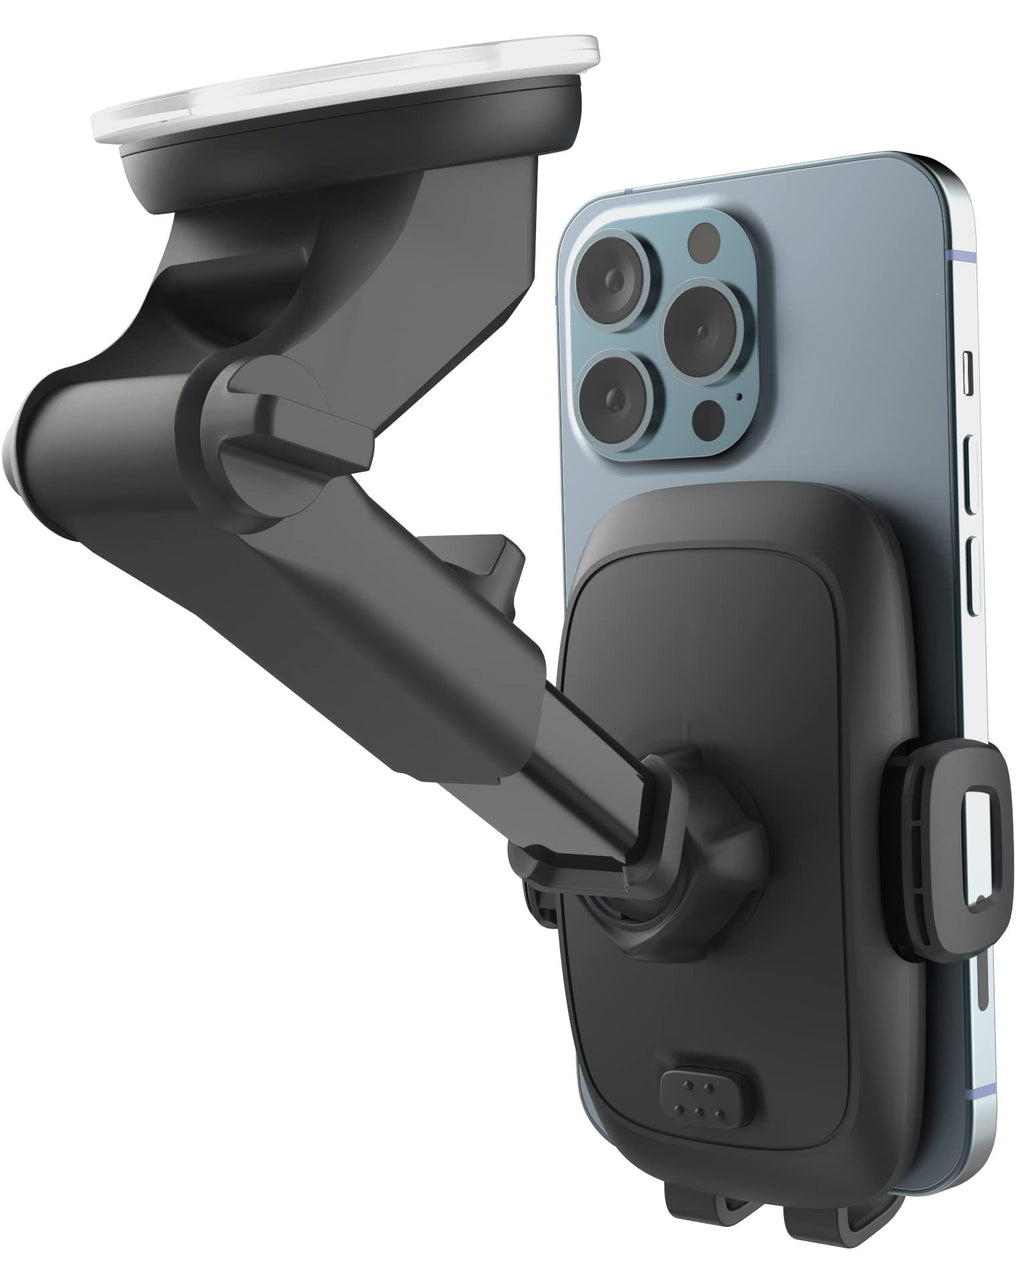  [AUSTRALIA] - Encased Car Mount for iPhone (Dashboard/Windshield) Cell Phone Holder Compatible with iPhone 11/12/13/14 Pro Max (Case Compatible)